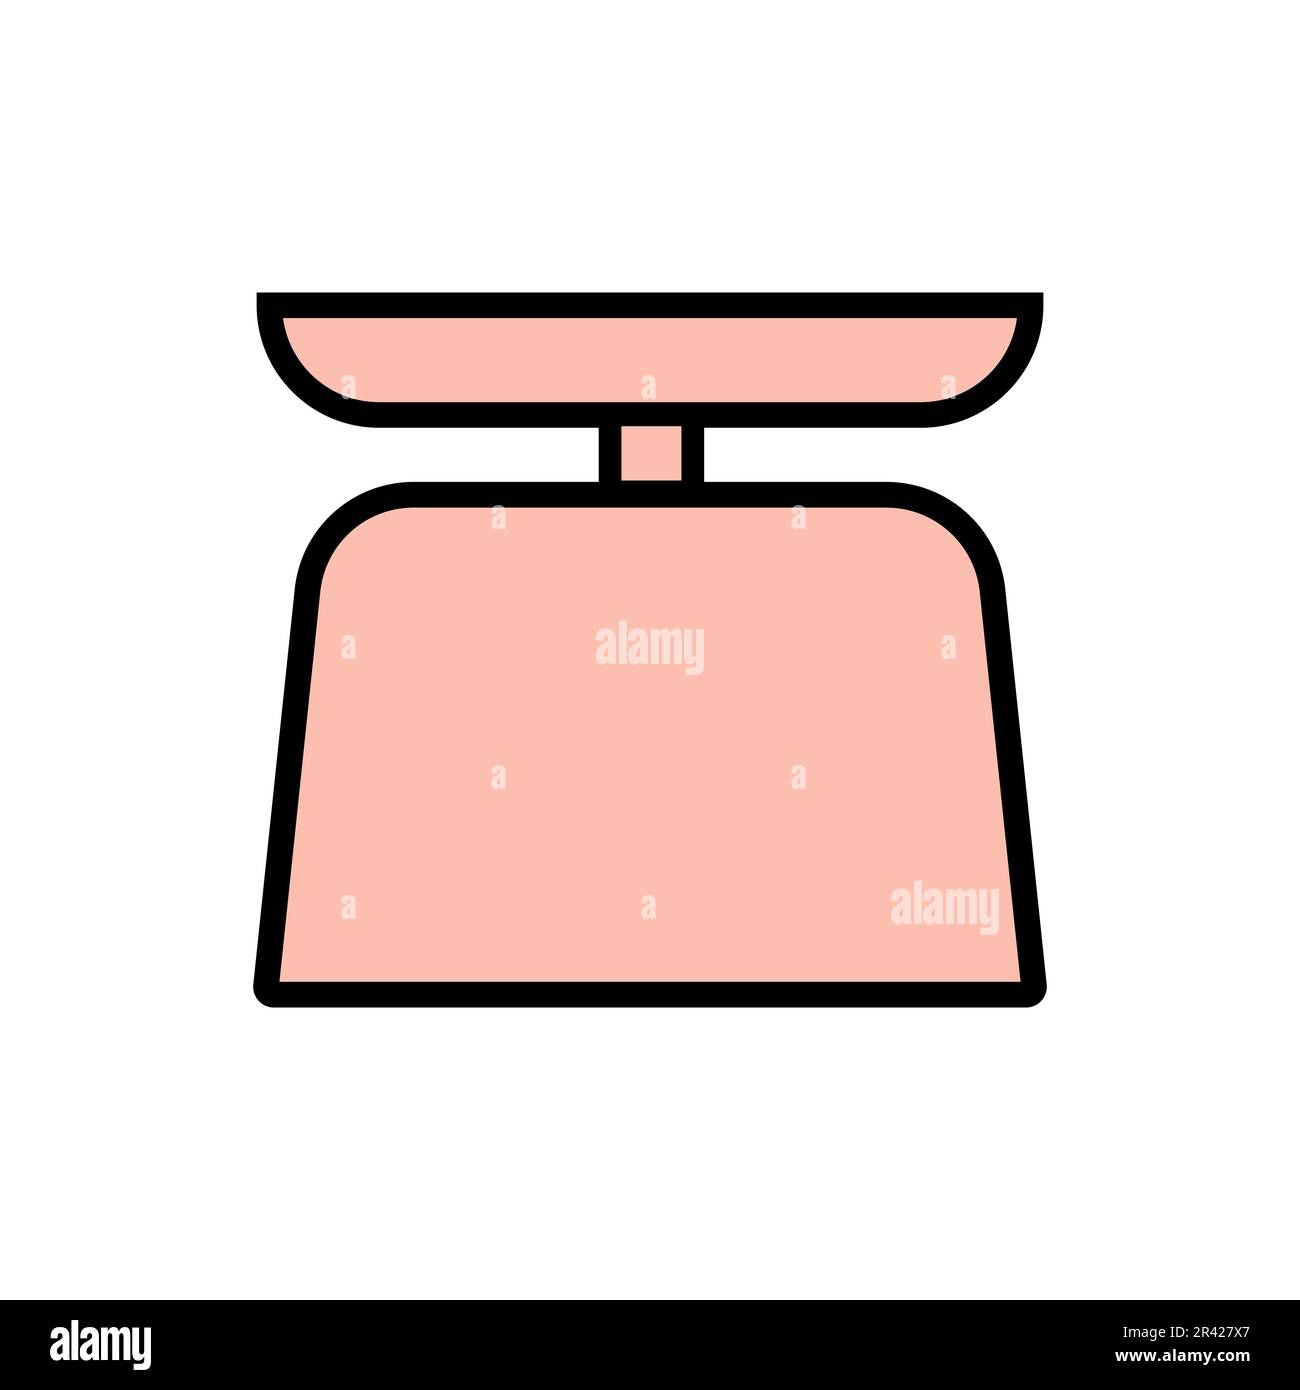 Premium Vector  The soft pink body scale serves to determine your weight  flat design